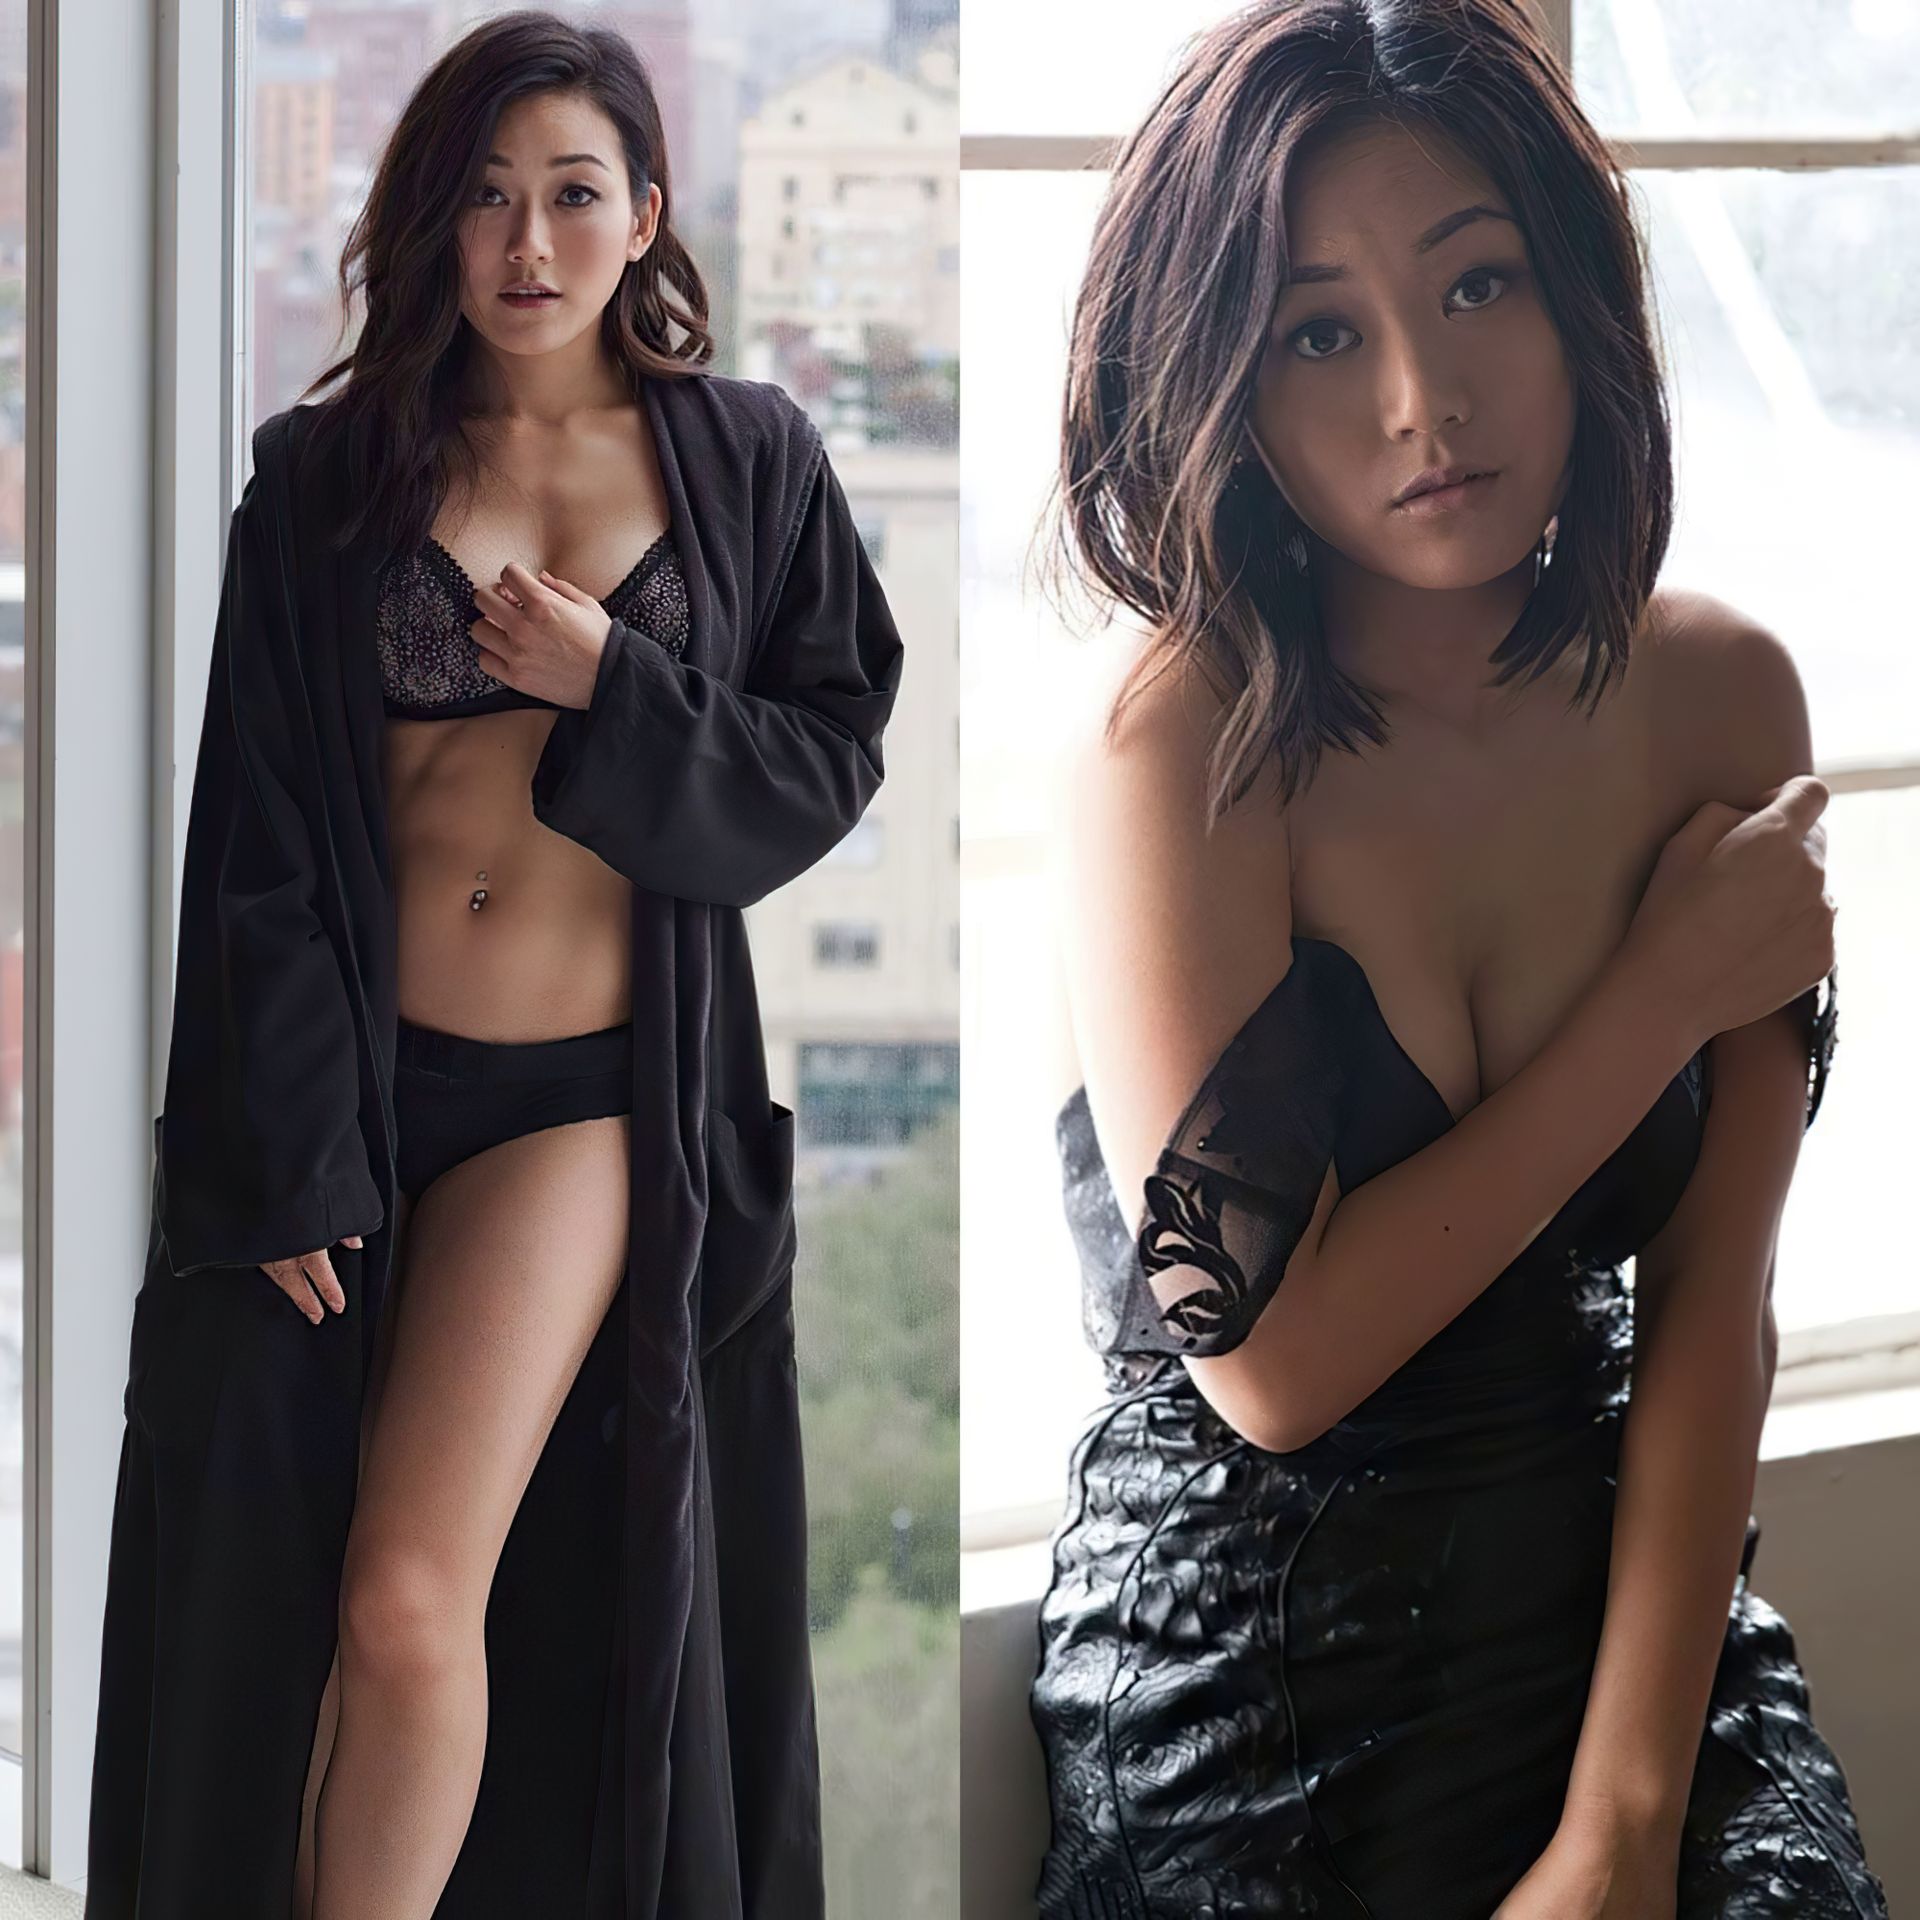 Selection Of The Hottest Karen Fukuhara Pictures - All Free New.